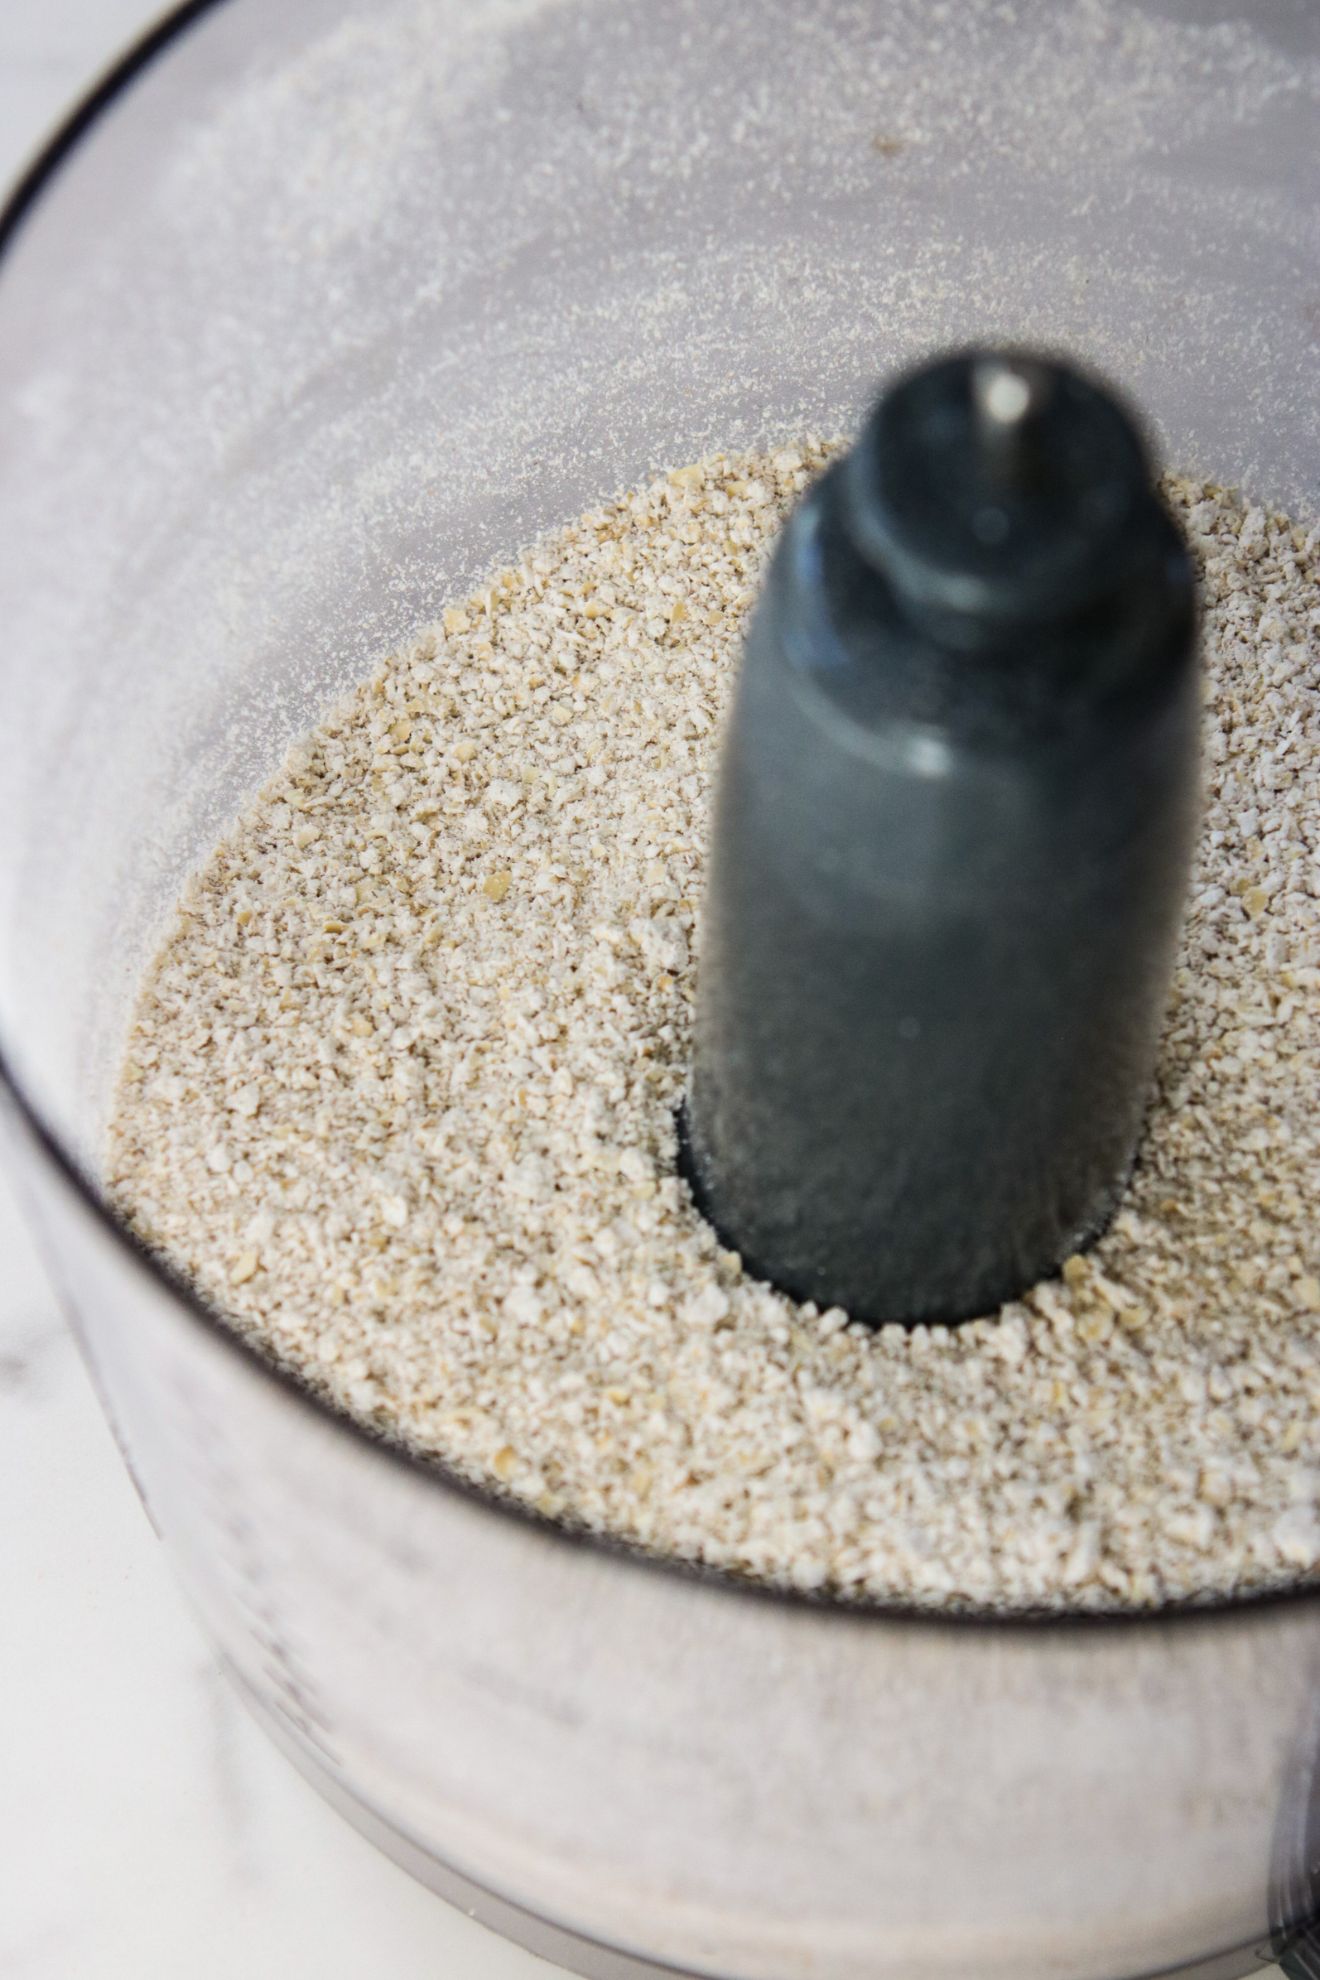 This is an overhead angled shot looking down into a food processor with oat flour in it. The food processor sits on a white marble countertop.